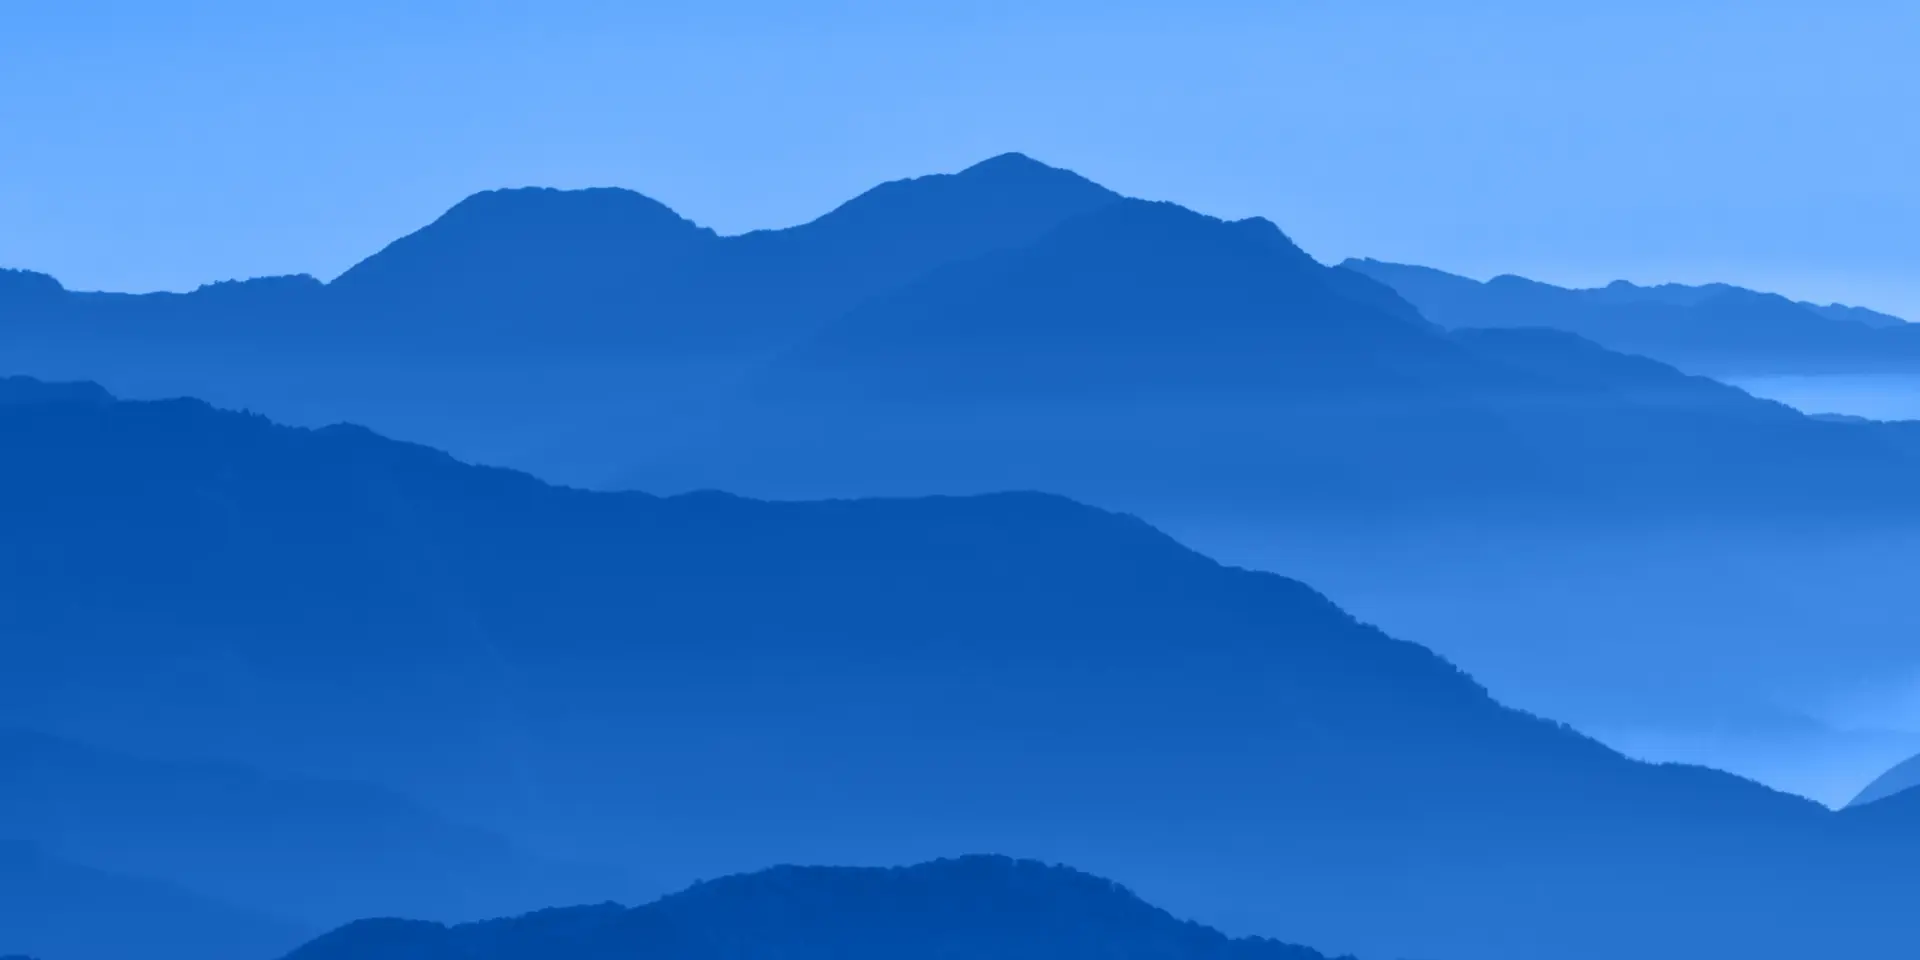 Monochromatic blue photograph of mountains receding away from the camera.